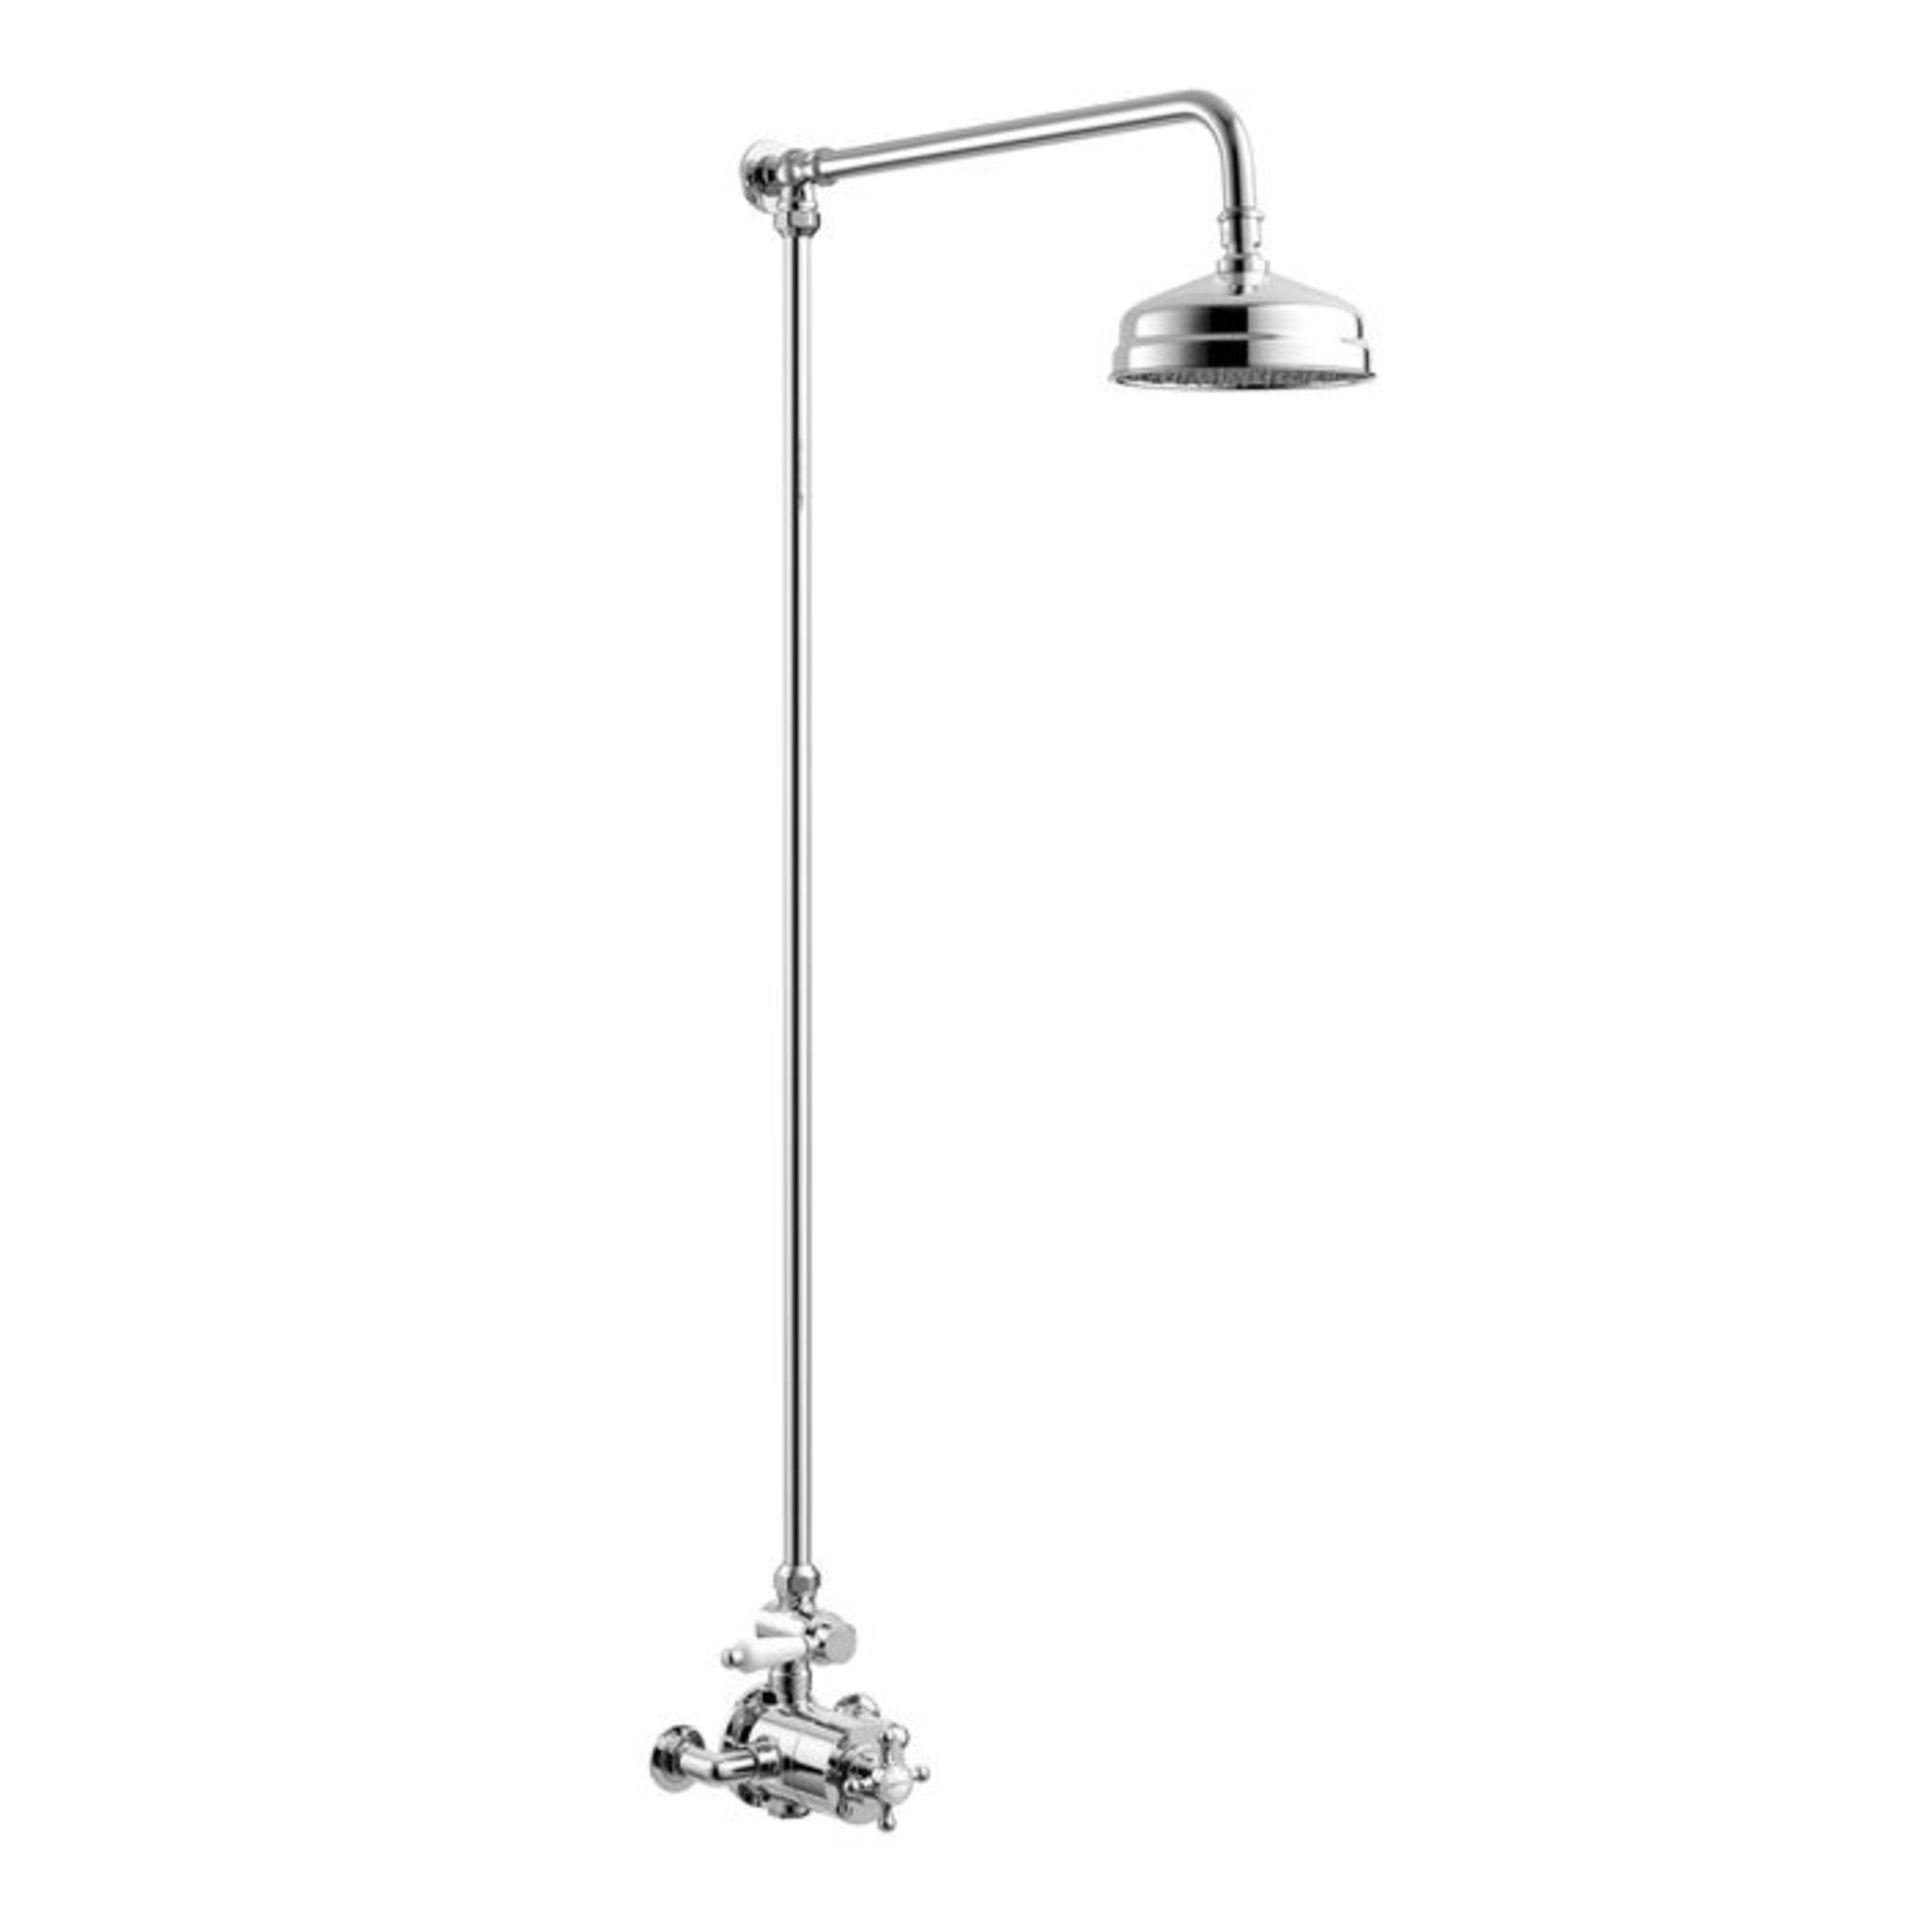 (YC63) Traditional Exposed Thermostatic Shower Kit & Medium Head. Traditional exposed valve - Image 2 of 3